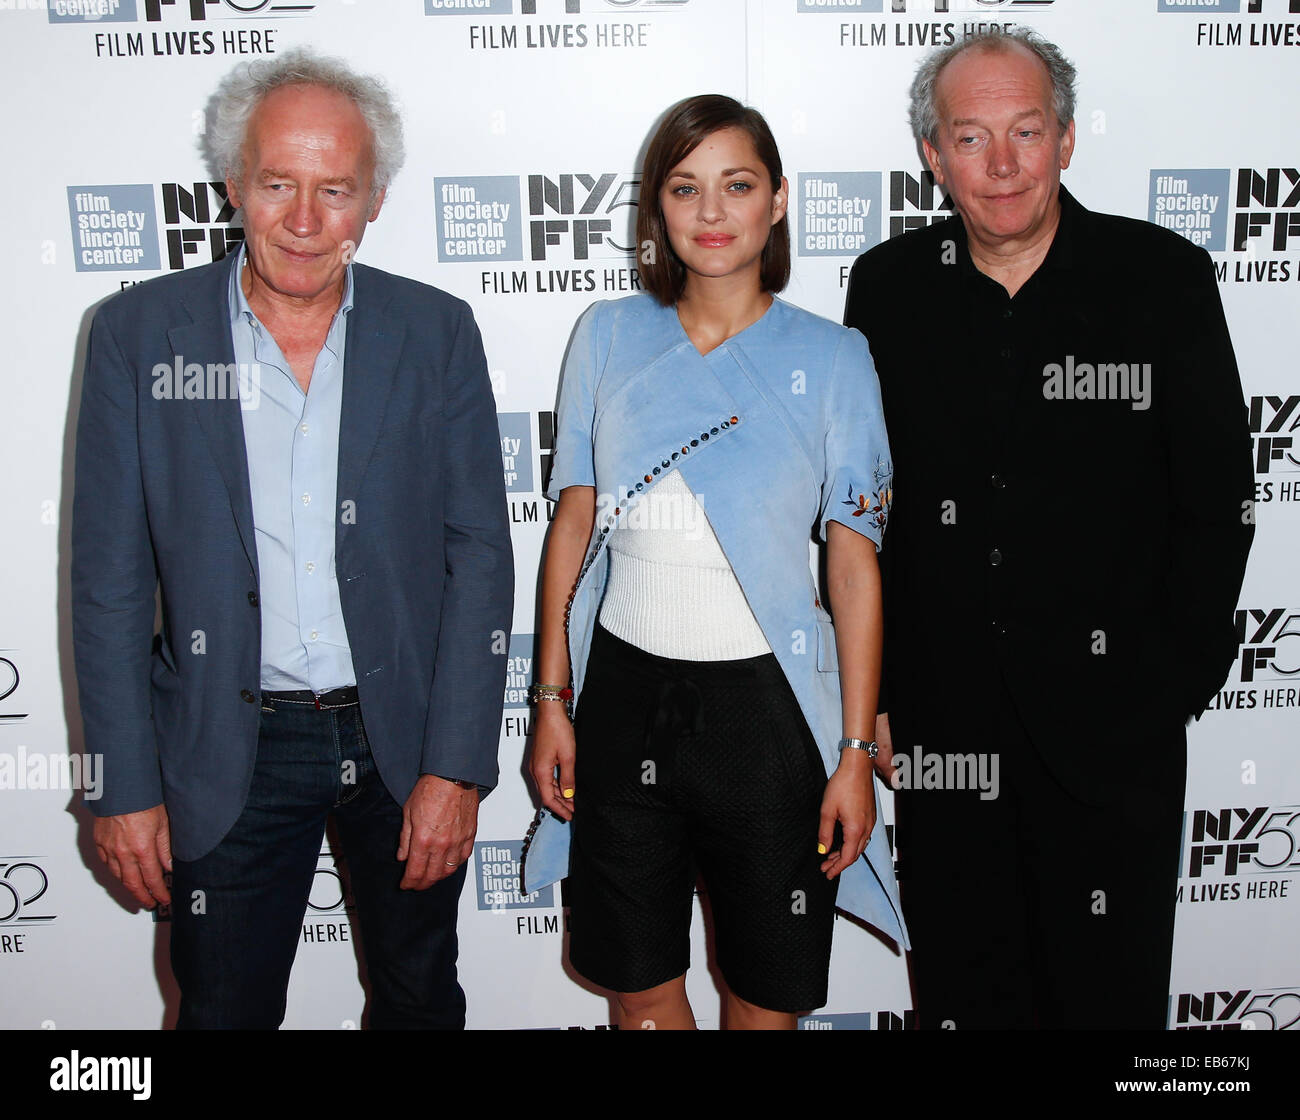 Director Jean-Pierre Dardenne, actress Marion Cotillard and producer Luc Dardenne attend the 'Two Days, One Night' premiere. Stock Photo